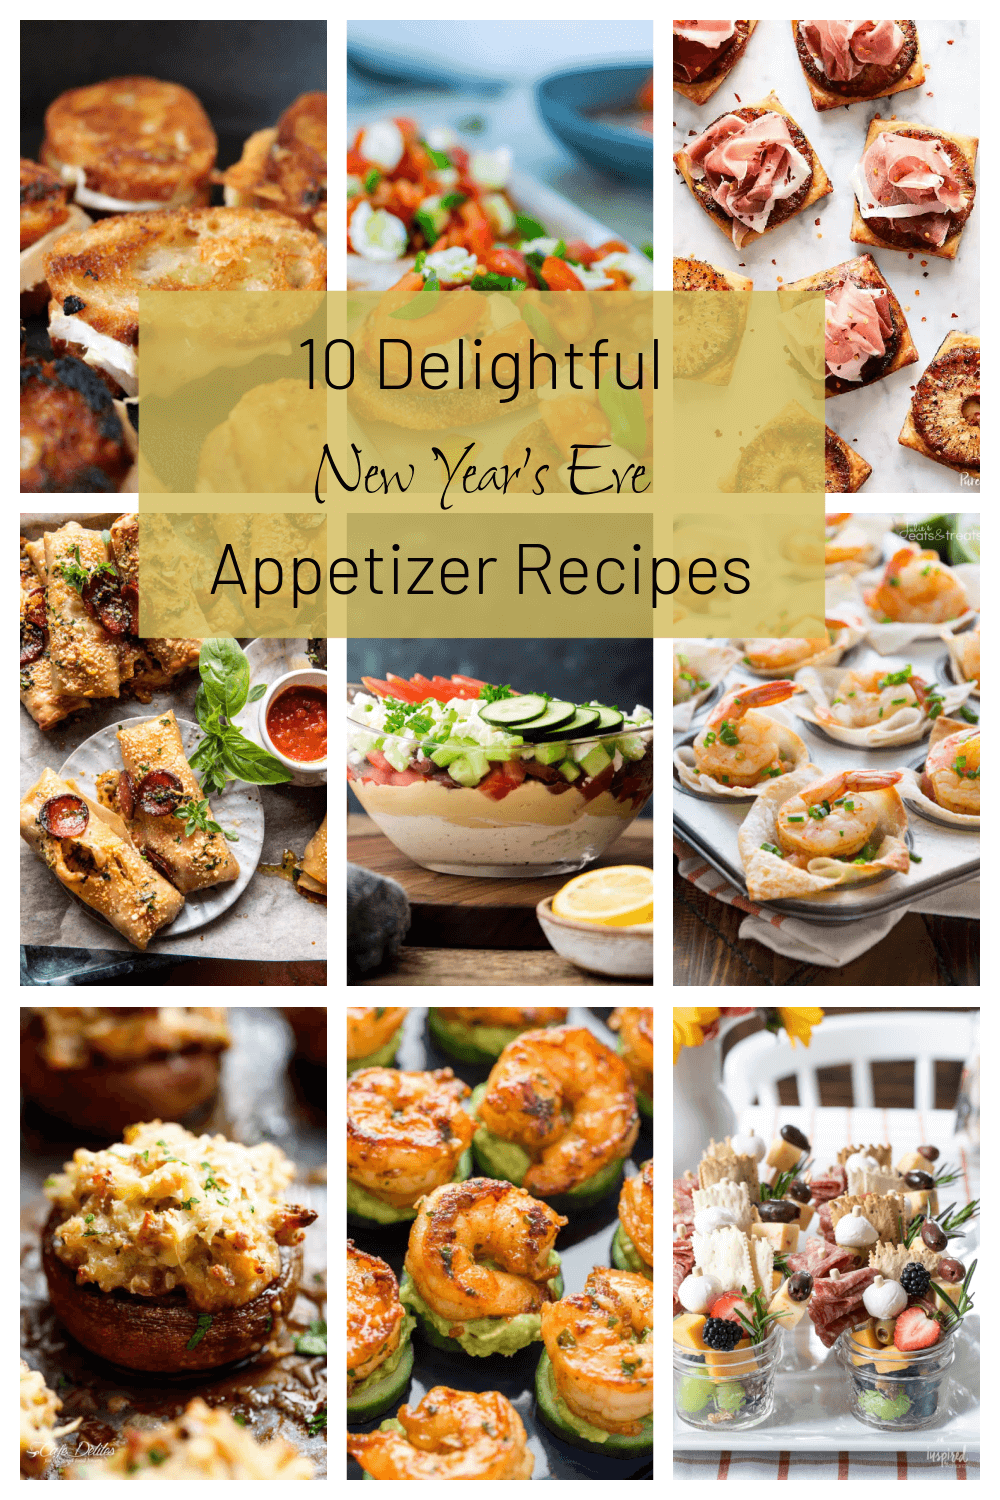 10 Delightful New Year’s Eve Appetizer Recipes